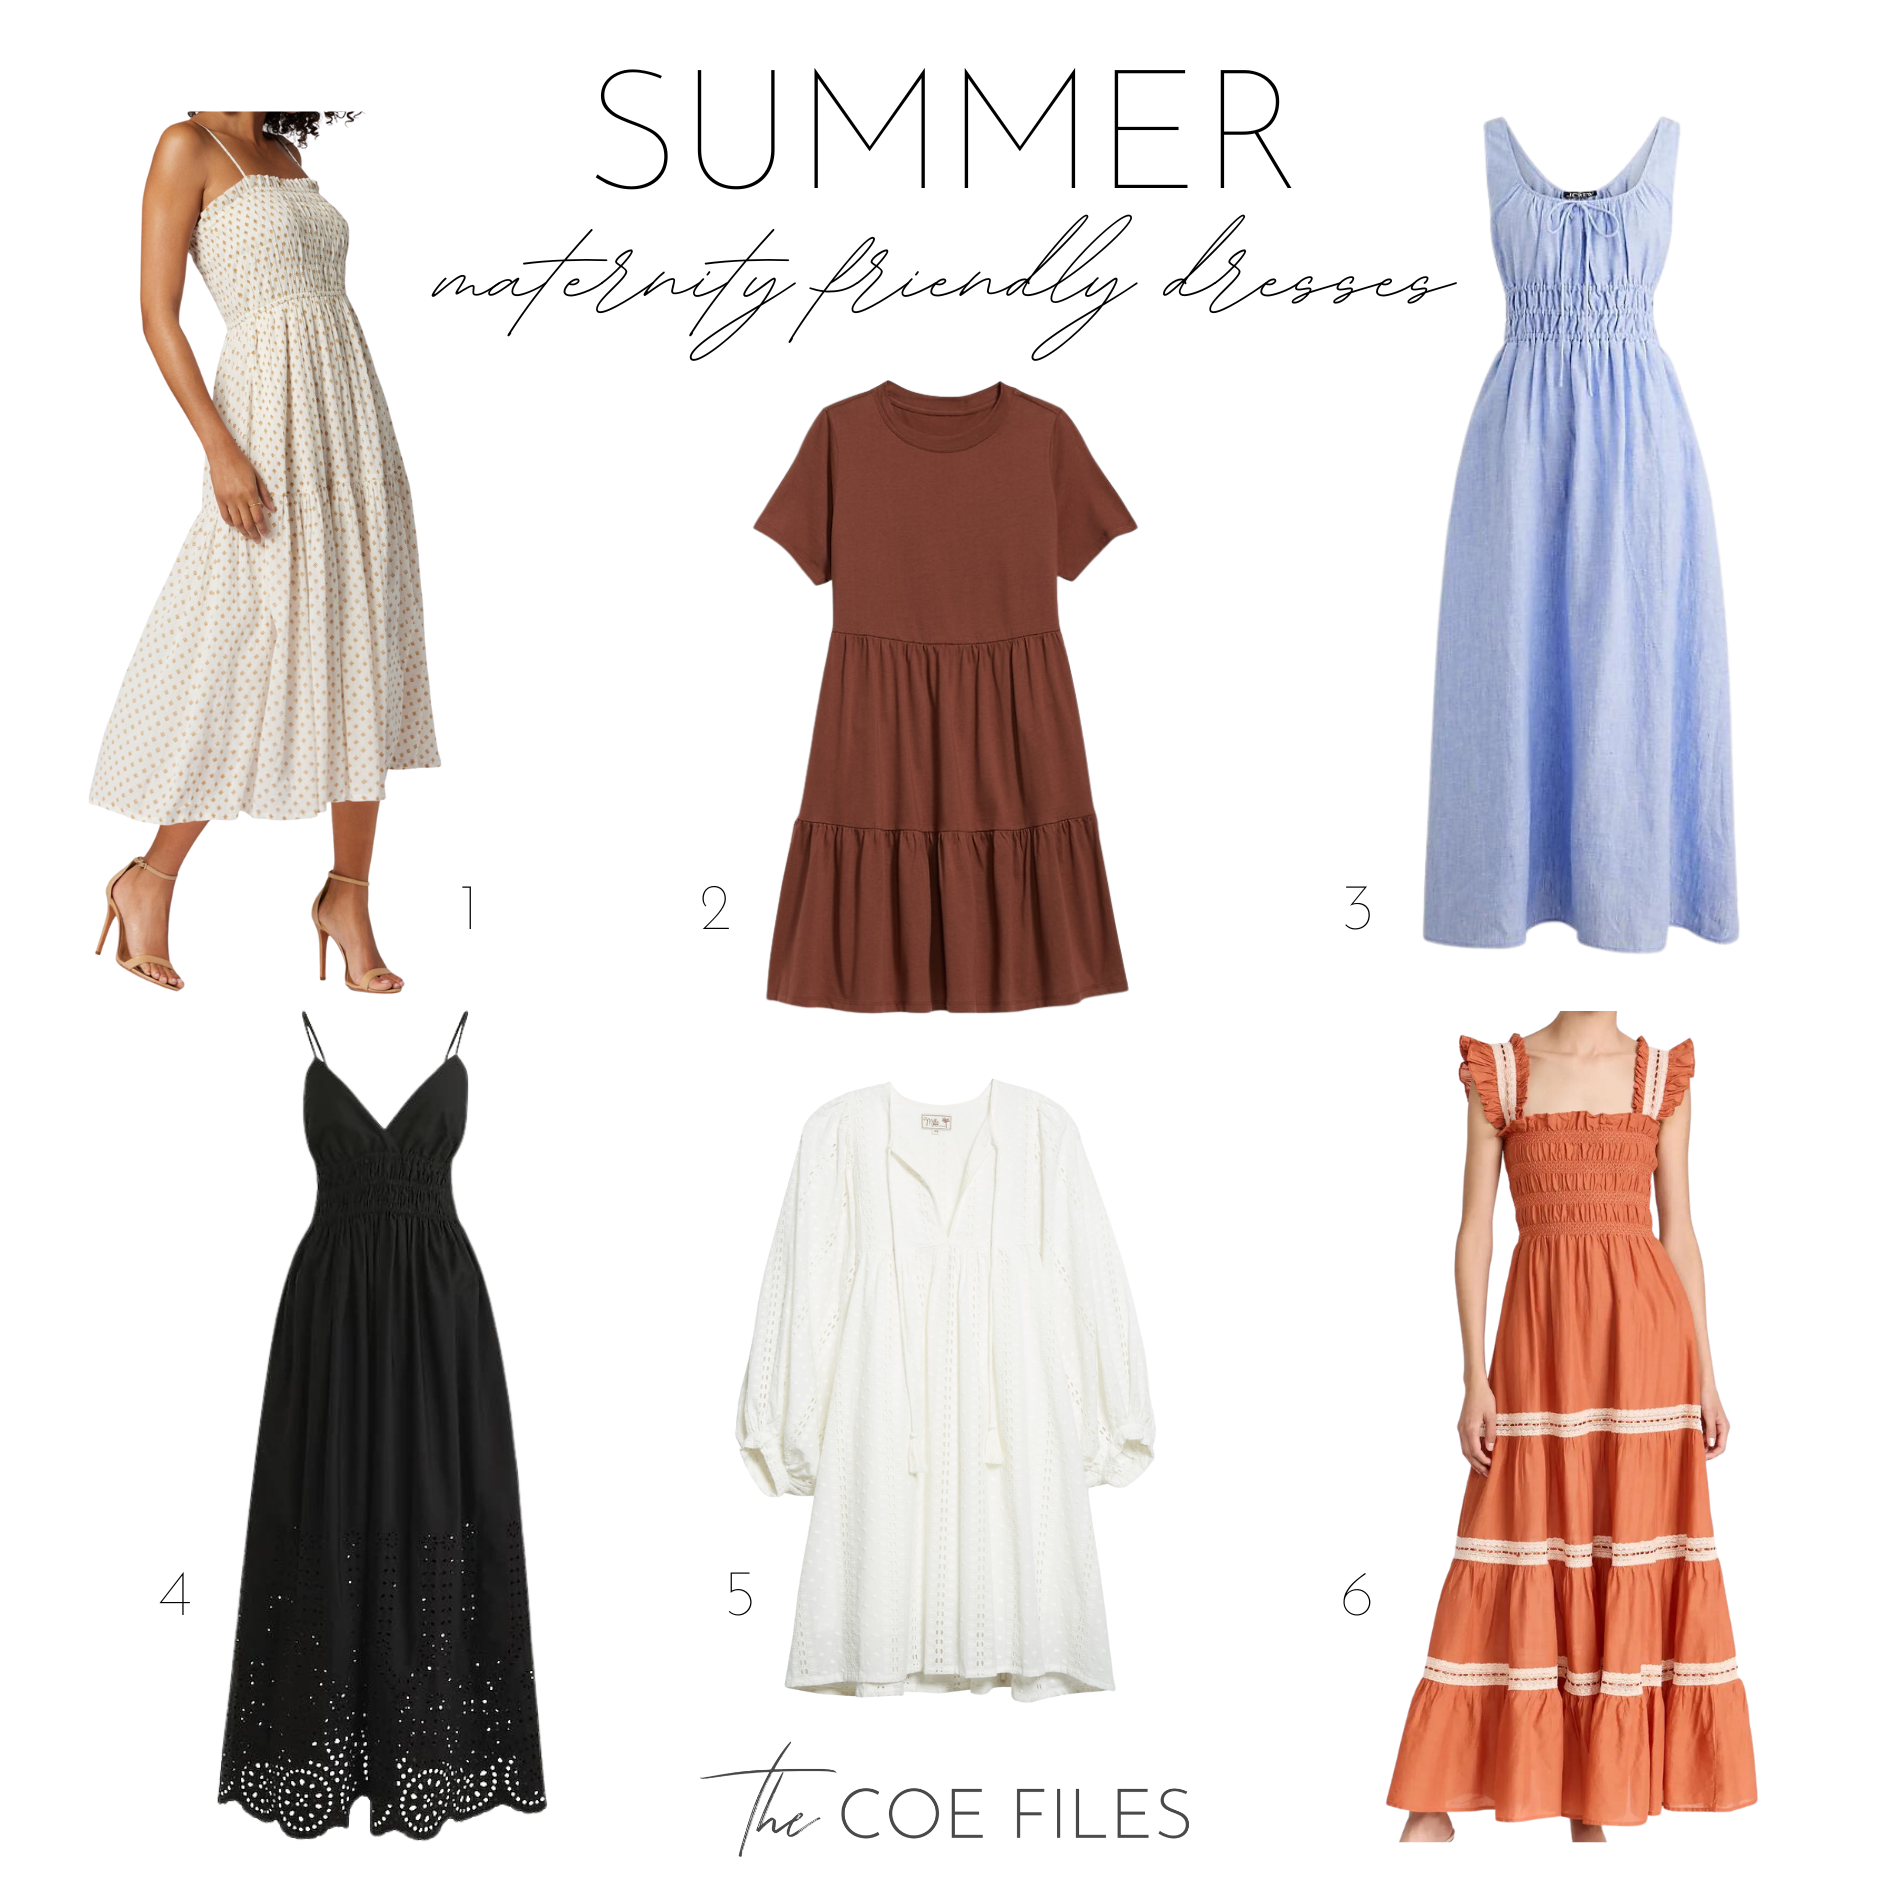 Summer (maternity friendly) Dresses - thecoefiles